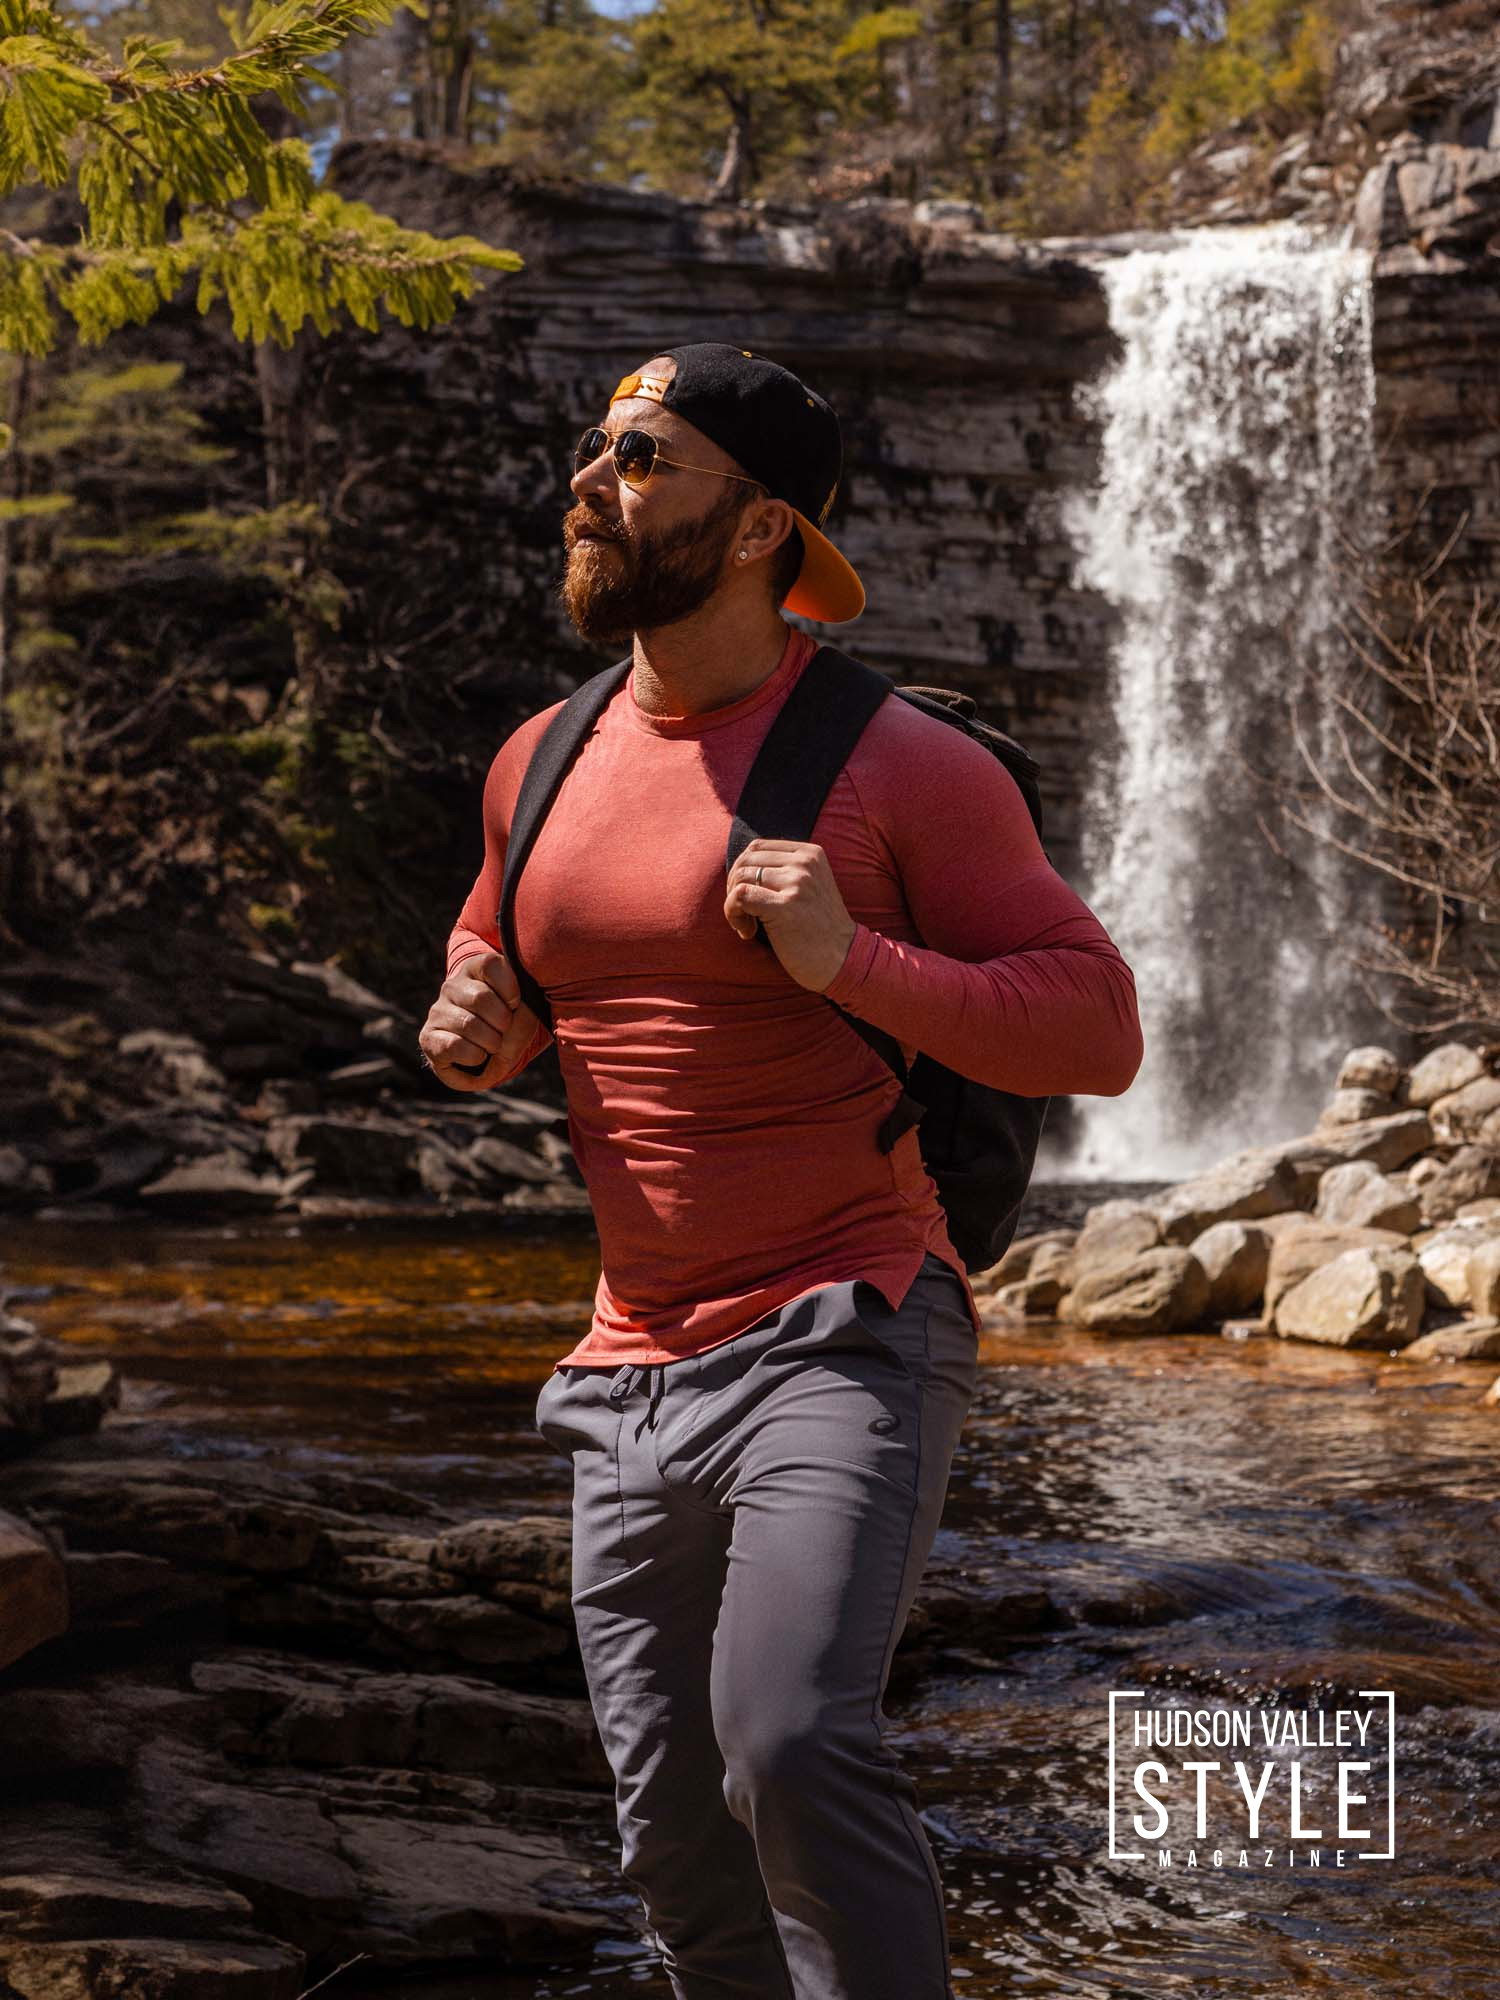 Discover the Ultimate Hiking Adventures in the Hudson Valley and Catskills This Summer – Presented by Alluvion Vacations – The Best Wellness-Focused Getaways in the Hudson Valley and Catskills